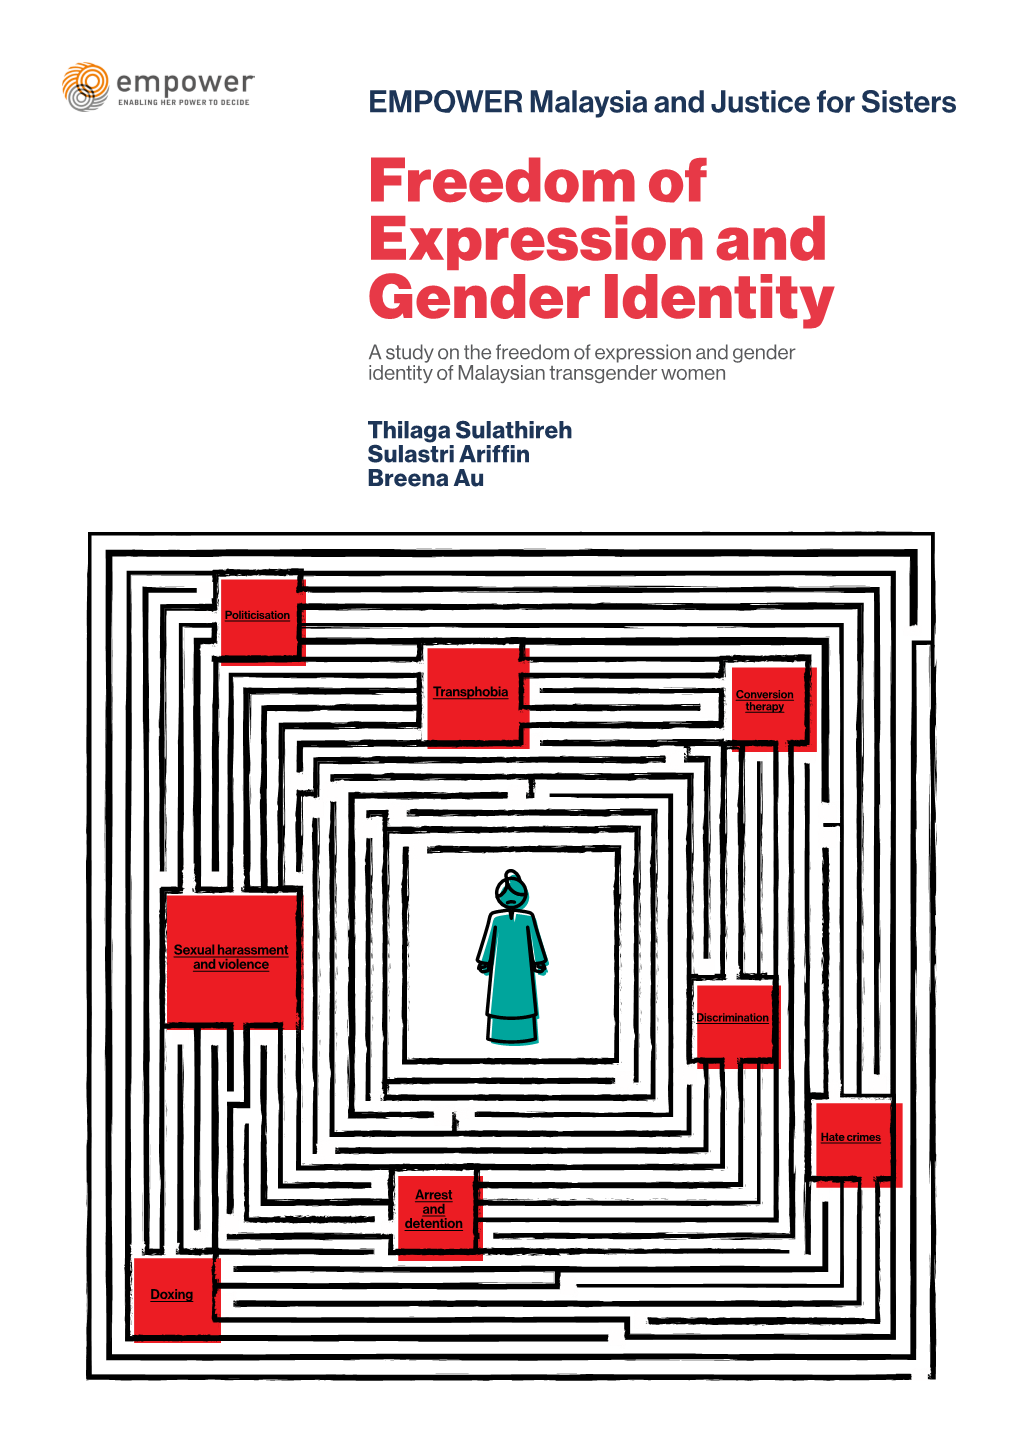 Freedom of Expression and Gender Identity a Study on the Freedom of Expression and Gender Identity of Malaysian Transgender Women